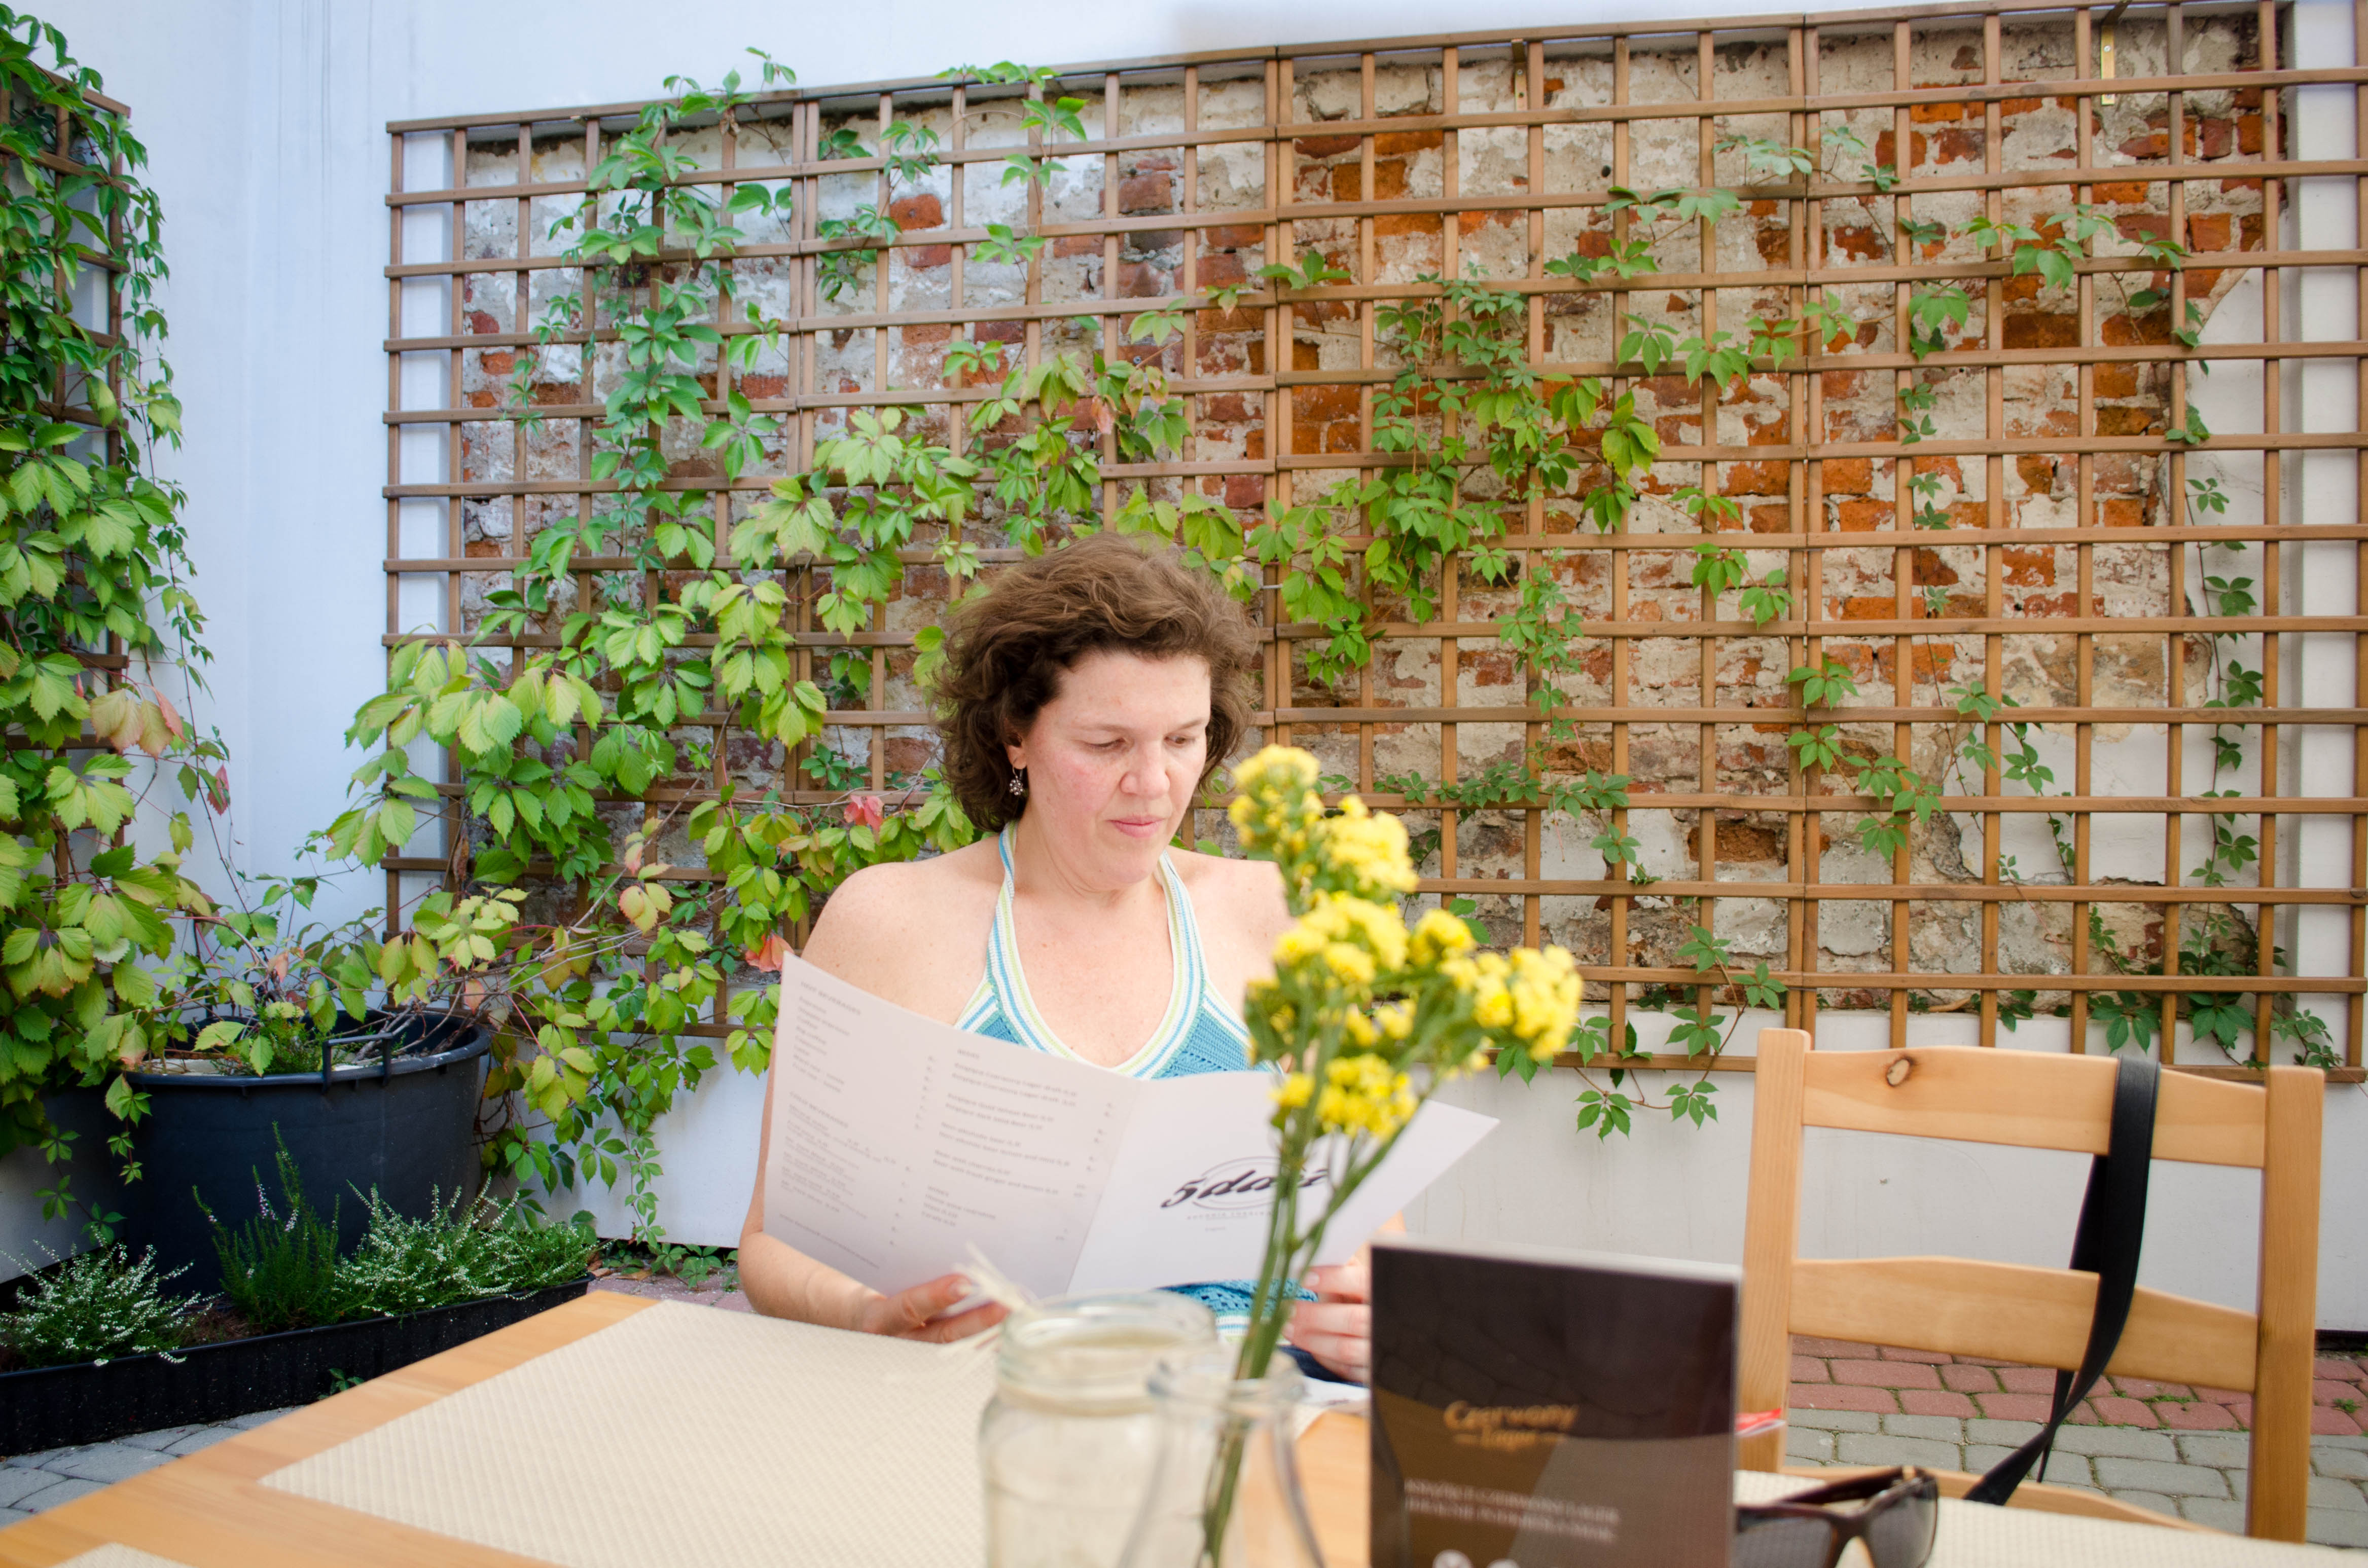 A woman ponders the menu at a beautiful outdoor café in Krakow, Poland.